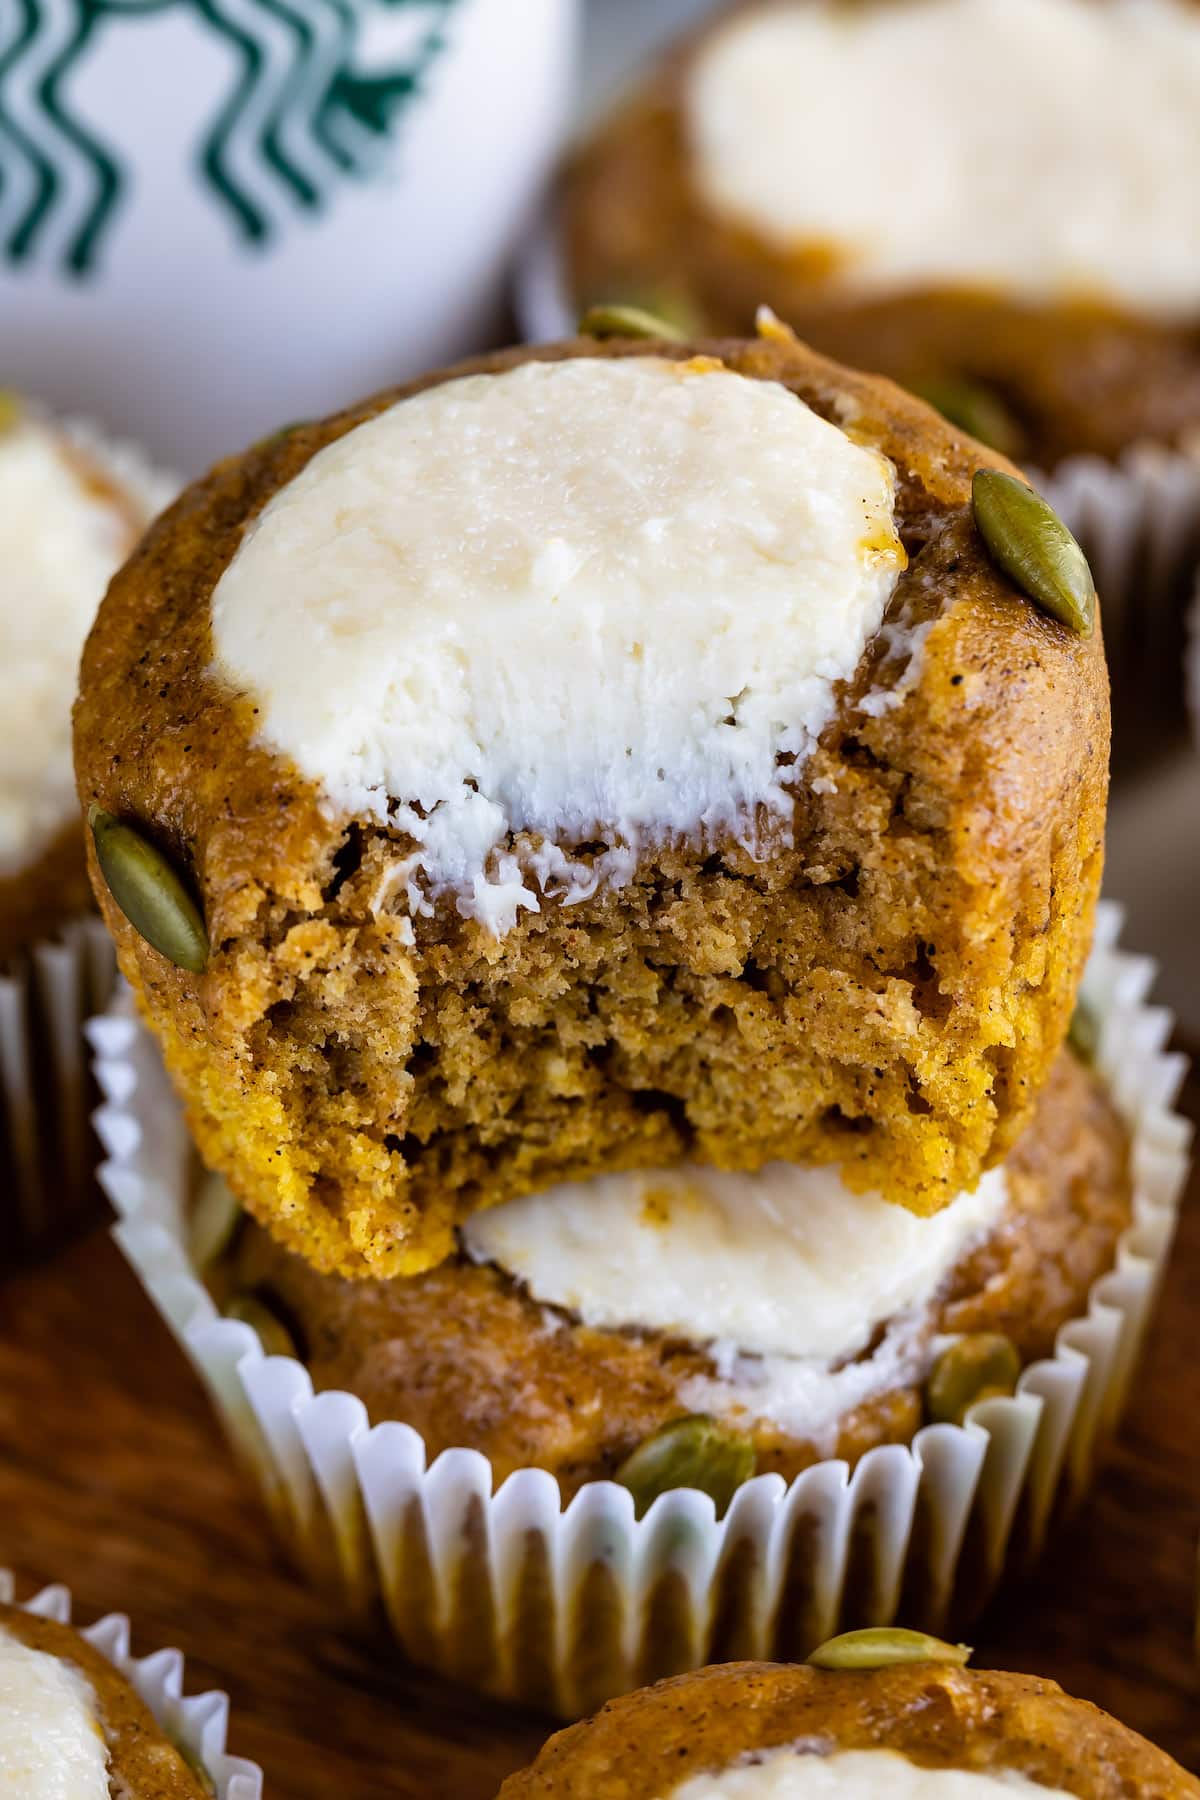 muffins with seeds and cream cheese in the center and bite missing